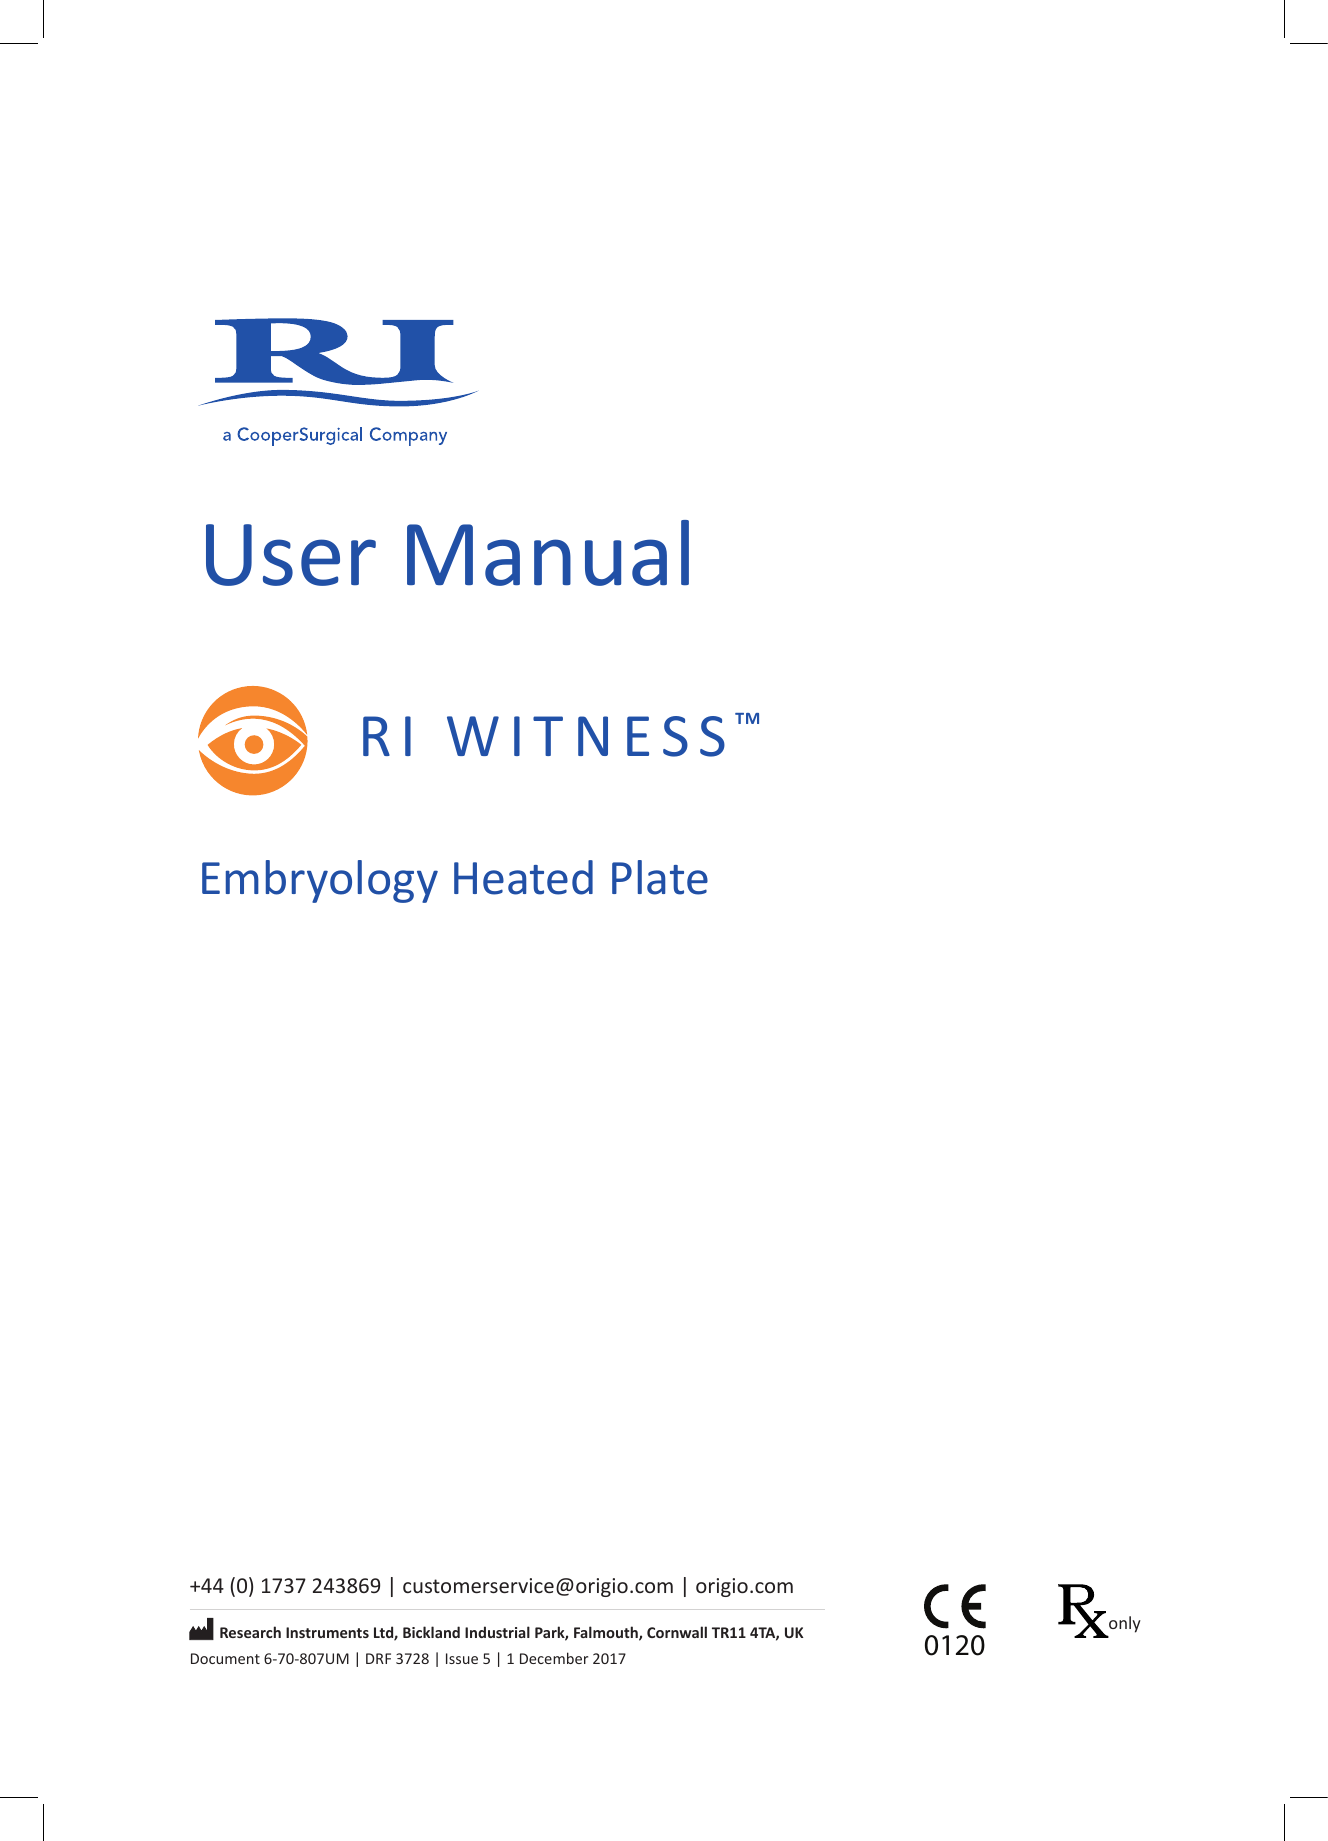 User ManualRI  WITNESS™Embryology Heated Plate+44 (0) 1737 243869 | customerservice@origio.com  | origio.comResearch Instruments Ltd, Bickland Industrial Park, Falmouth, Cornwall TR11 4TA, UKDocument 6-70-807UM | DRF 3728 | Issue 5 | 1 December 20170120only